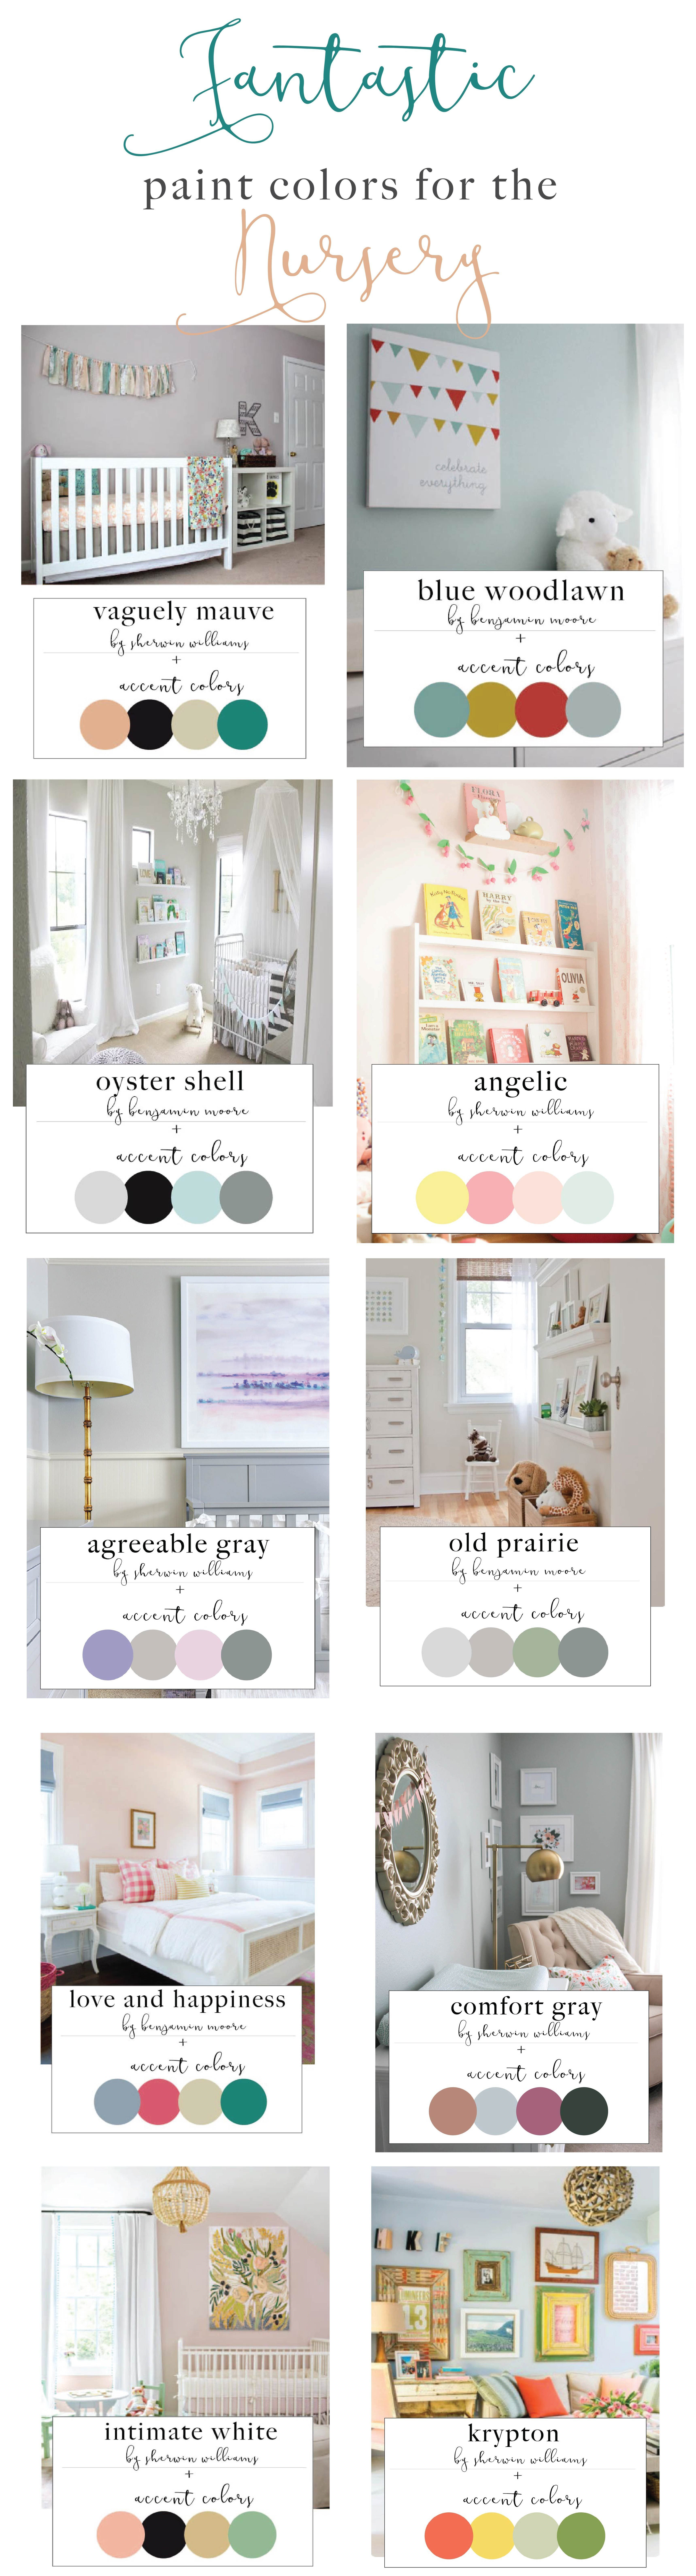 Beautiful Paint Colors for the Nursery